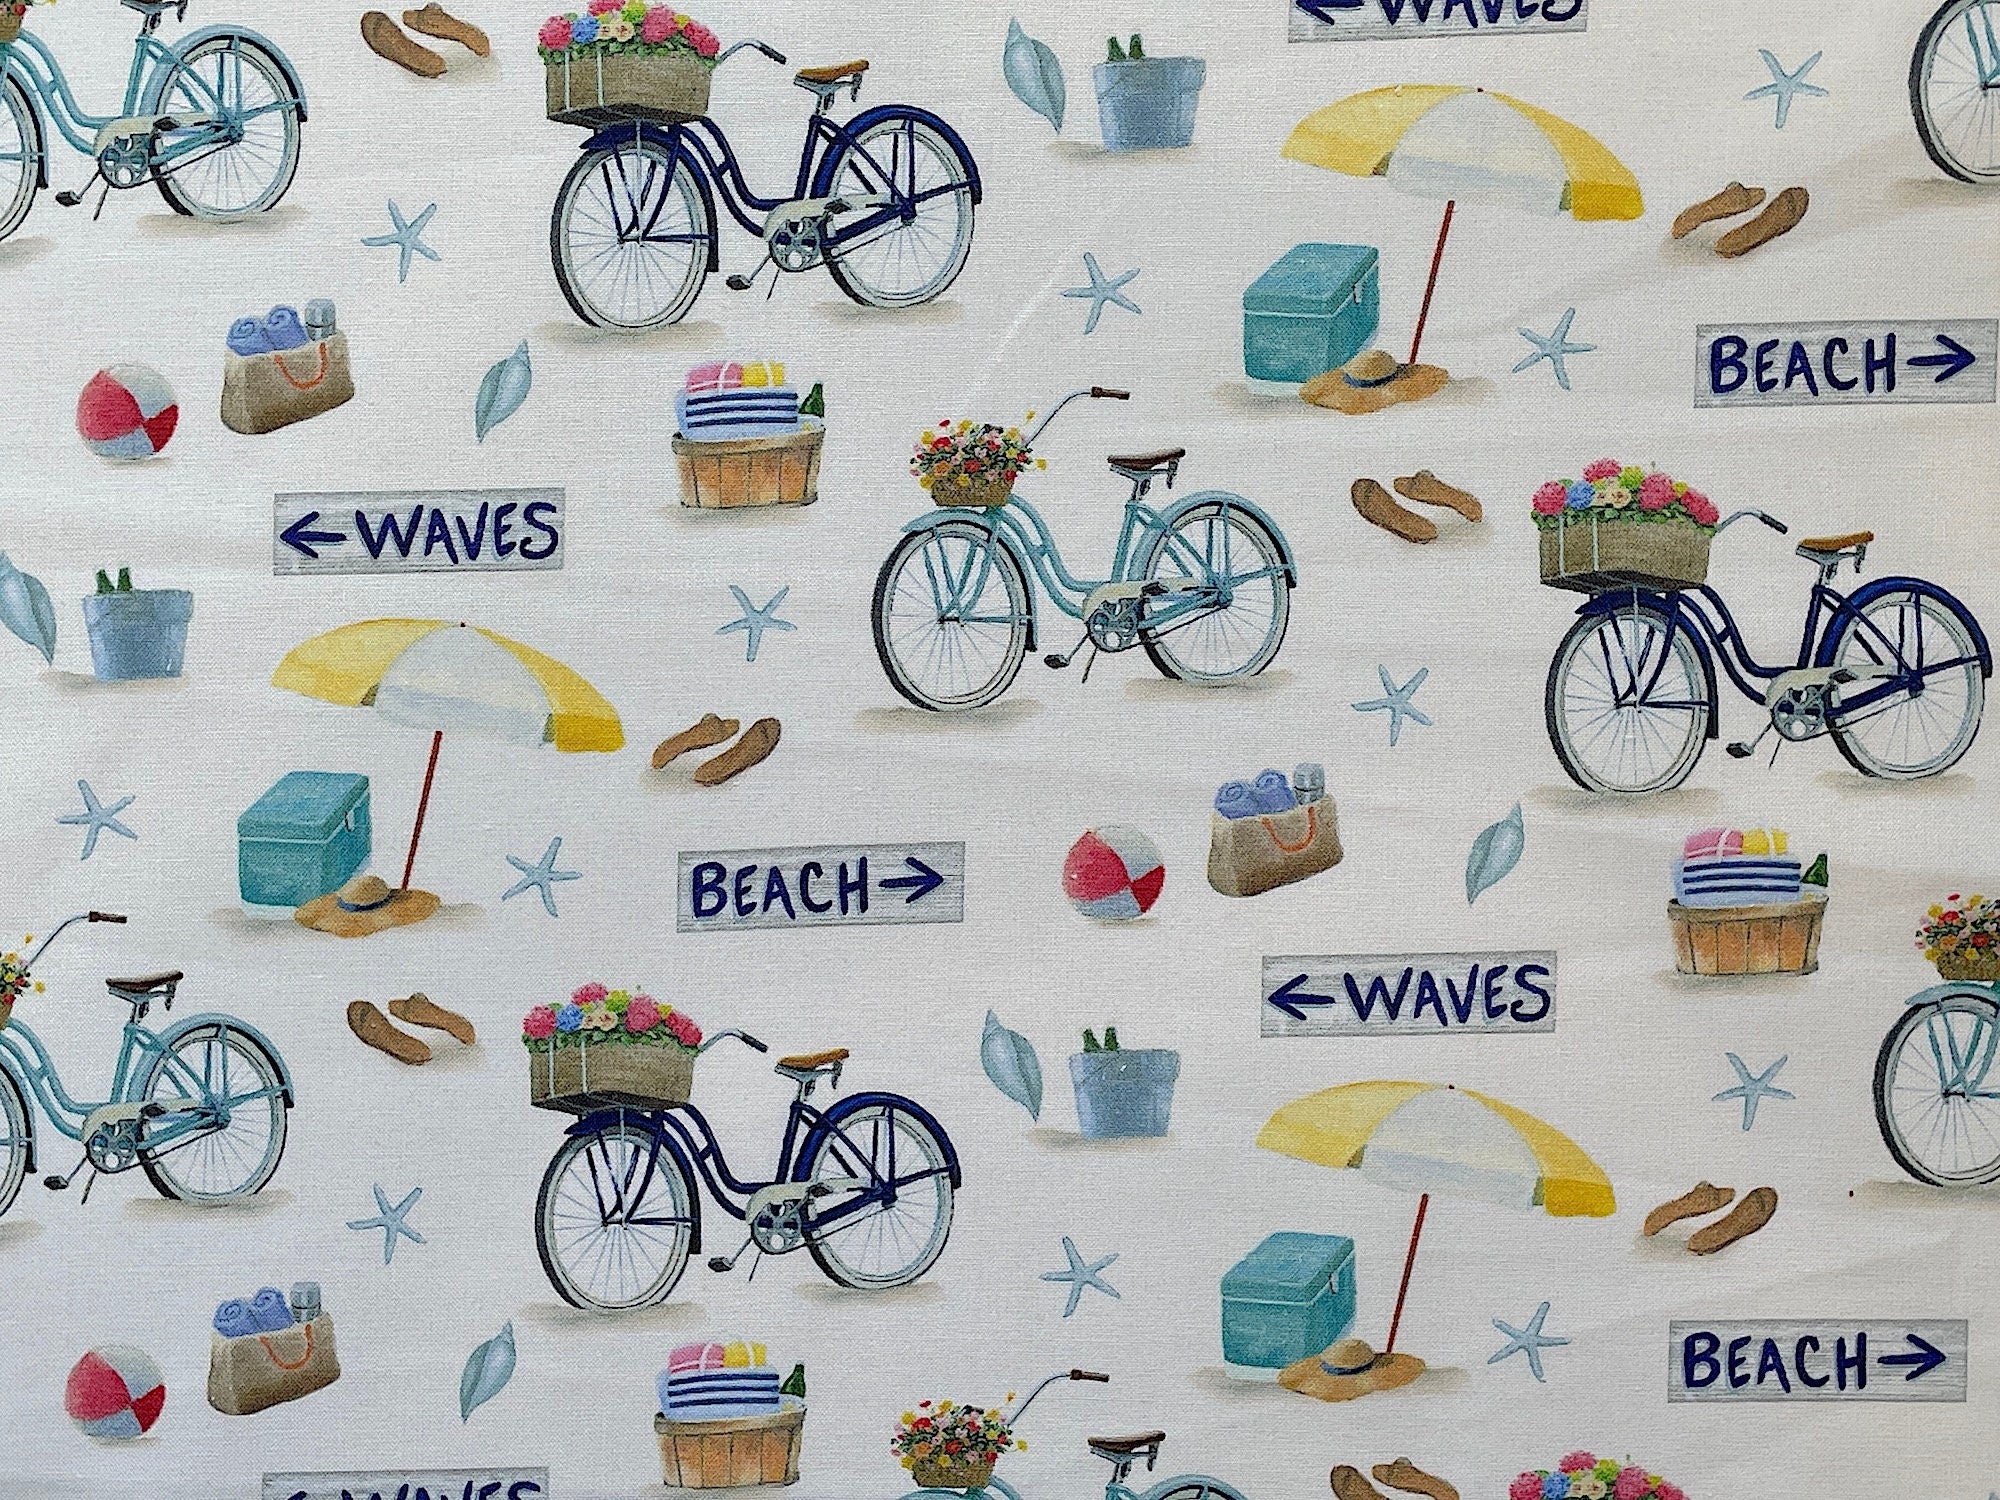 This fabric is part of the Beach Time collection by P&B Textiles. This cream fabric is covered with bicycles, beach umbrellas, beach balls, tote bags, coolers and more. There are Beach and Waves signs throughout the fabric. This fabric was designed by James Wiens